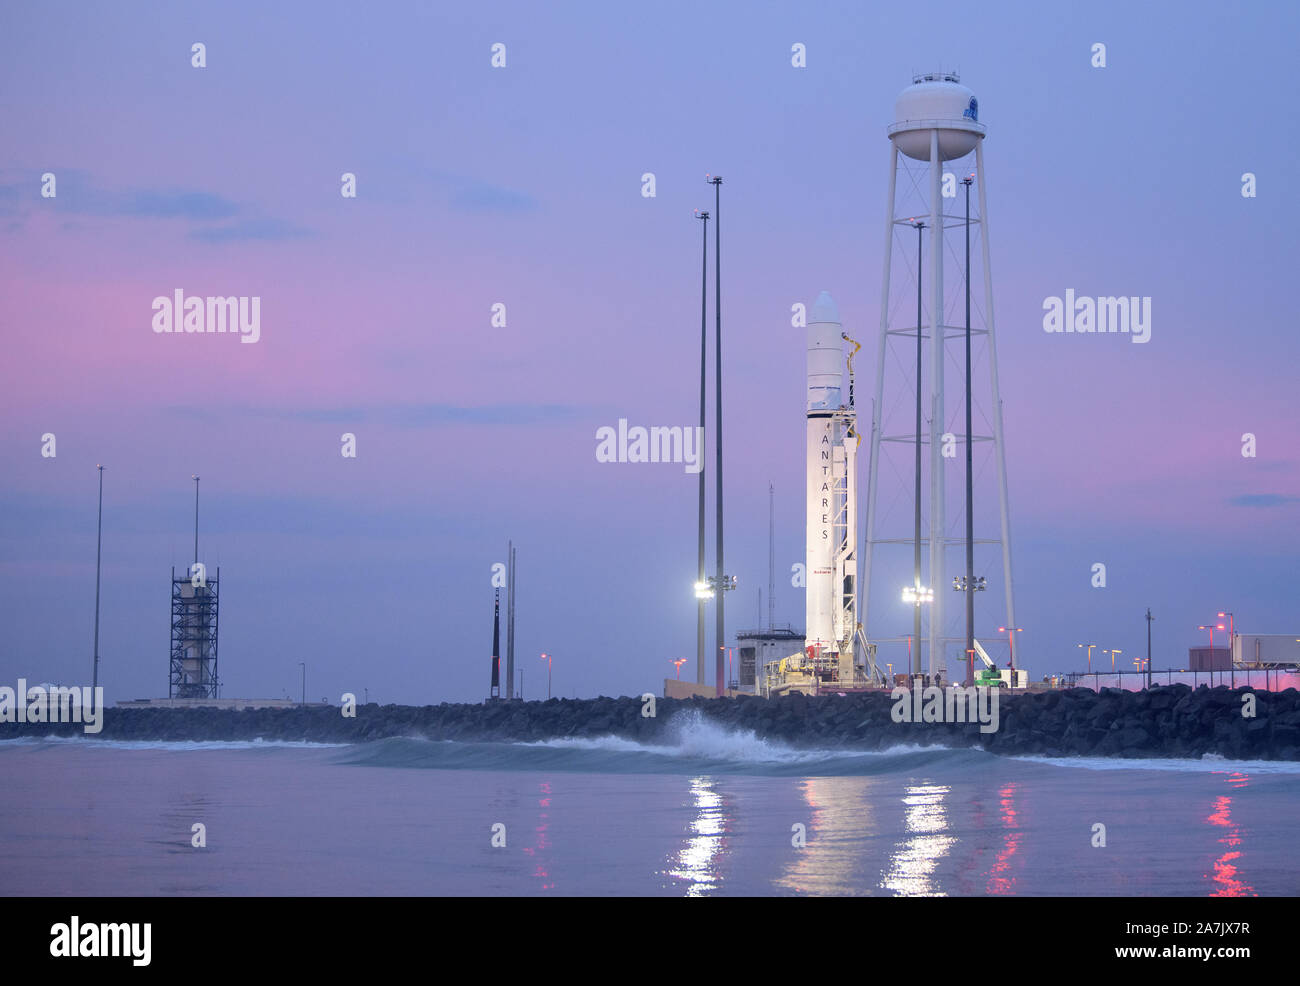 The Northrop Grumman Antares rocket, with Cygnus resupply spacecraft onboard, on launch Pad-0A at the NASA Wallops Flight Facility October 30, 2019 in Wallops, Virginia. The commercial cargo resupply mission will deliver 8,200 pounds of research, crew supplies and vehicle hardware to the the International Space Station on November 2nd. Stock Photo